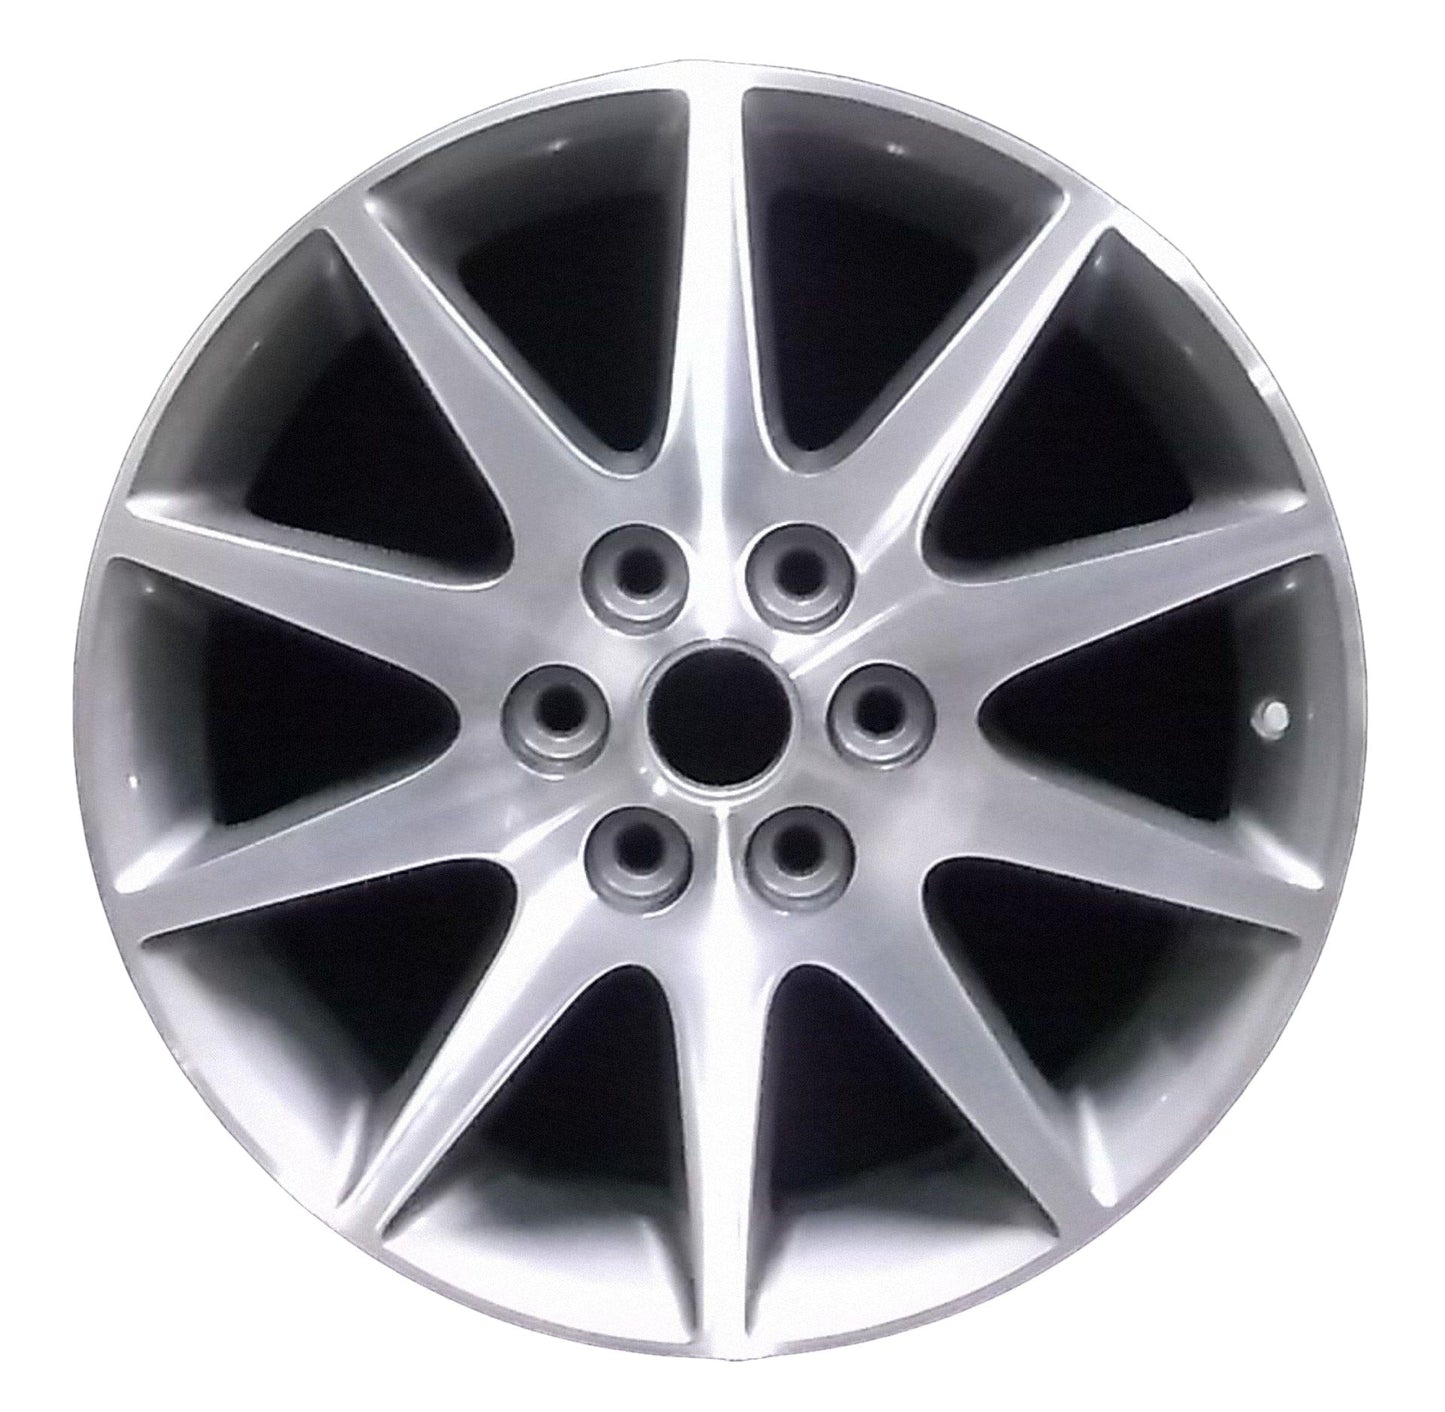 Buick Enclave  2013, 2014, 2015, 2016, 2017 Factory OEM Car Wheel Size 19x7.5 Alloy WAO.4131.LC13.MA